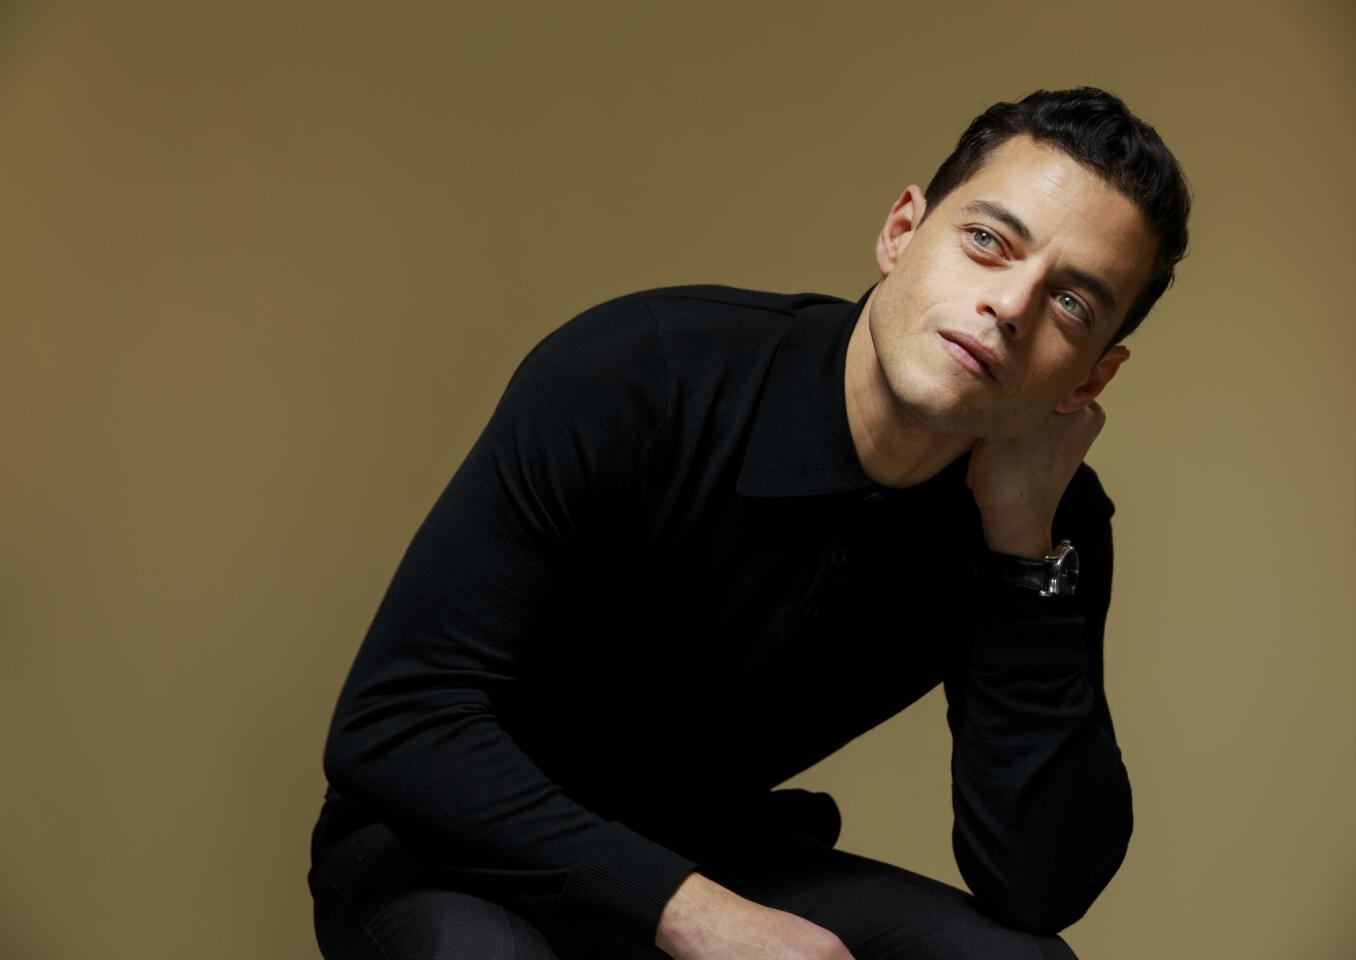 It’s the first nomination for Rami Malek, who already claimed a Golden Globe for portraying iconic singer Freddie Mercury. He’s nominated by BAFTA and SAG as well, and already has an Emmy for the ongoing drama series “Mr. Robot.”